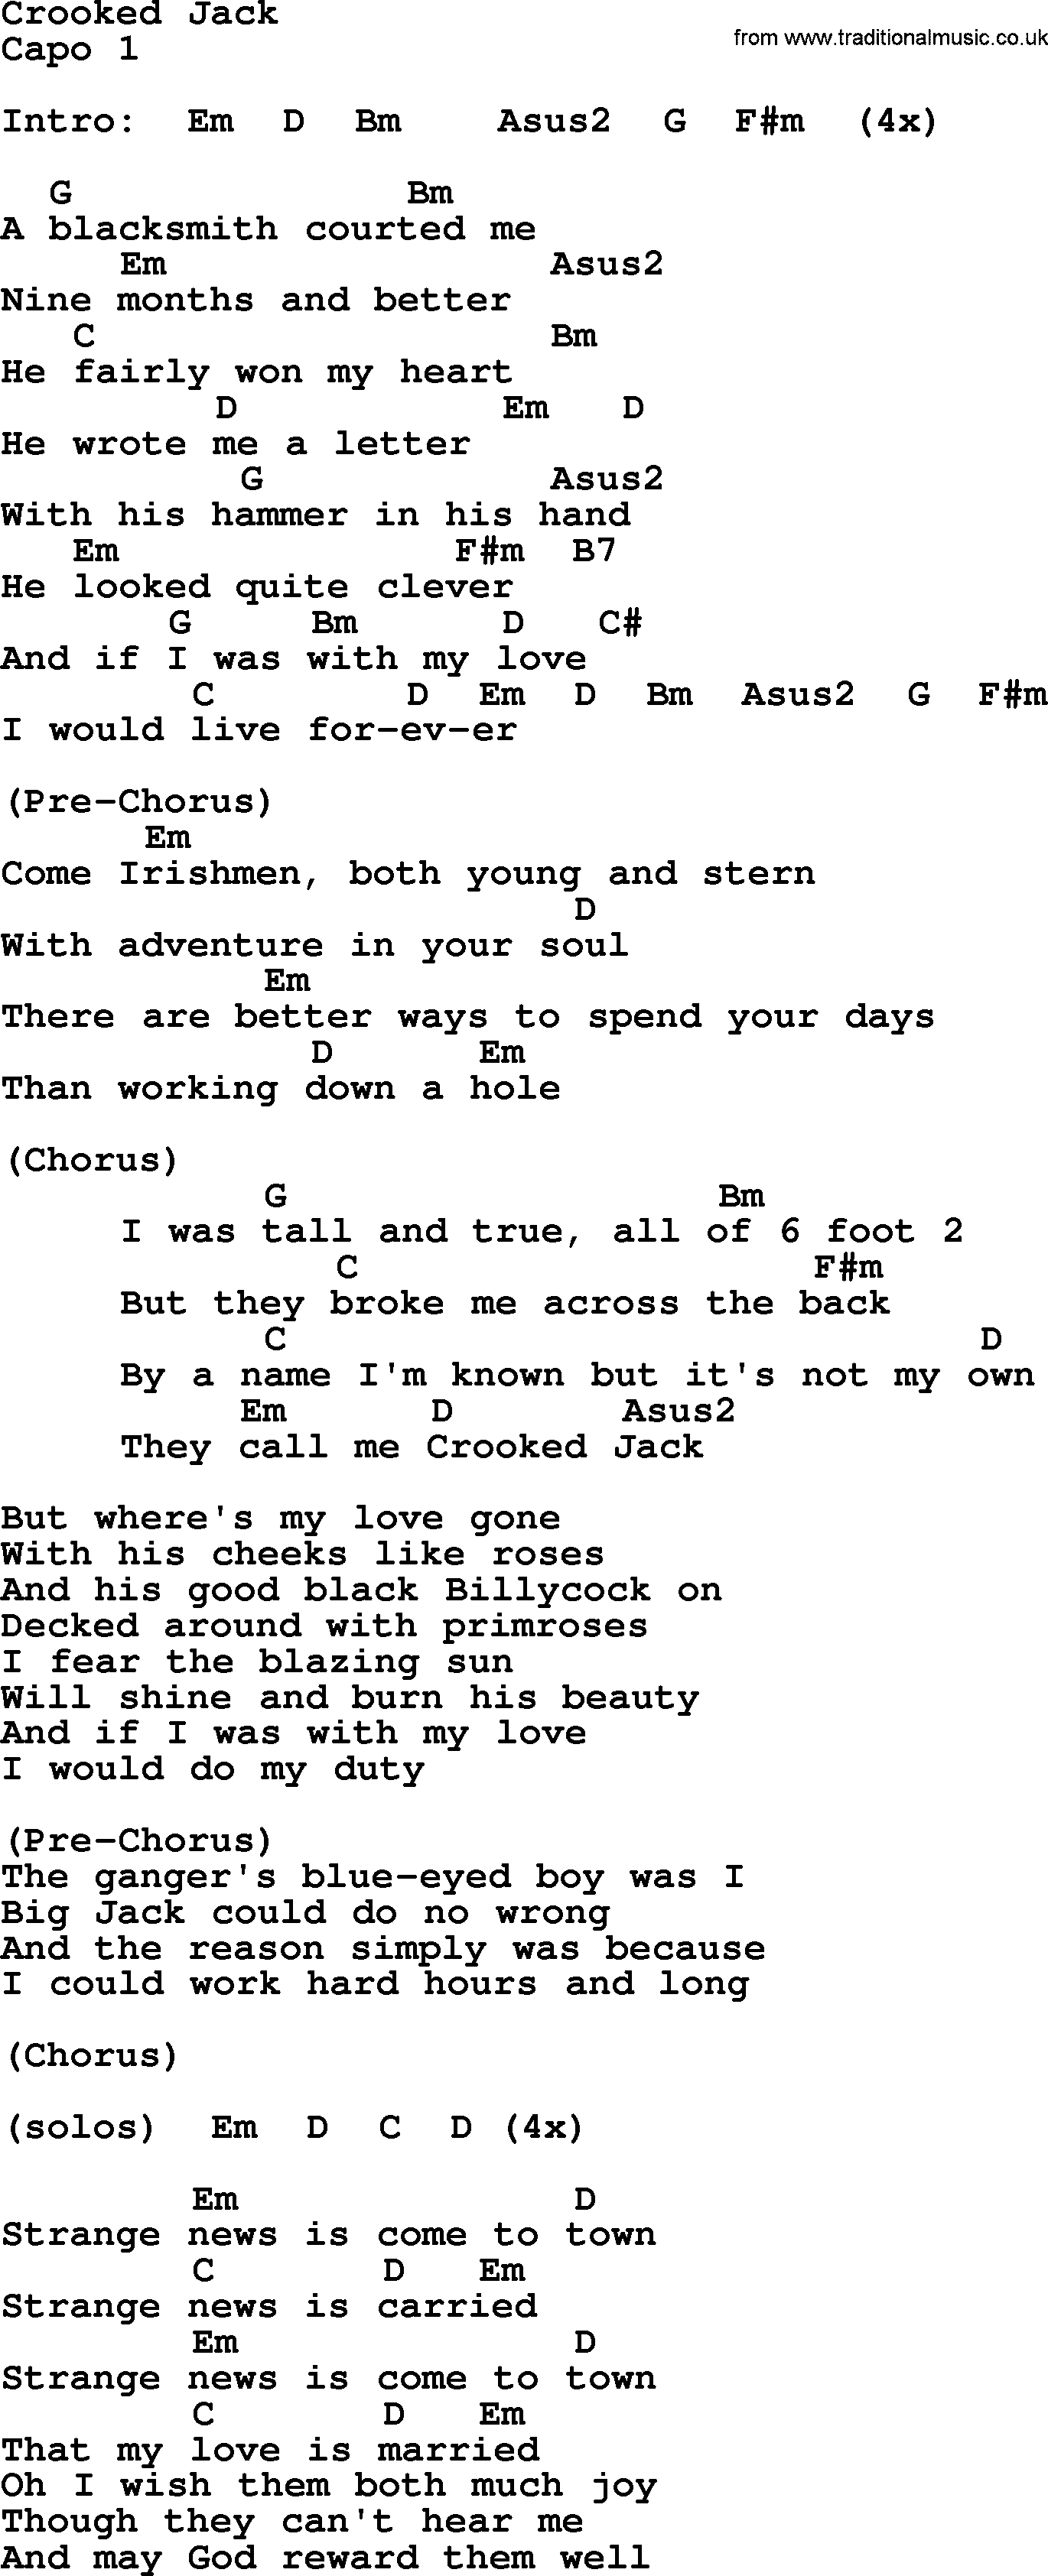 Bluegrass song: Crooked Jack, lyrics and chords